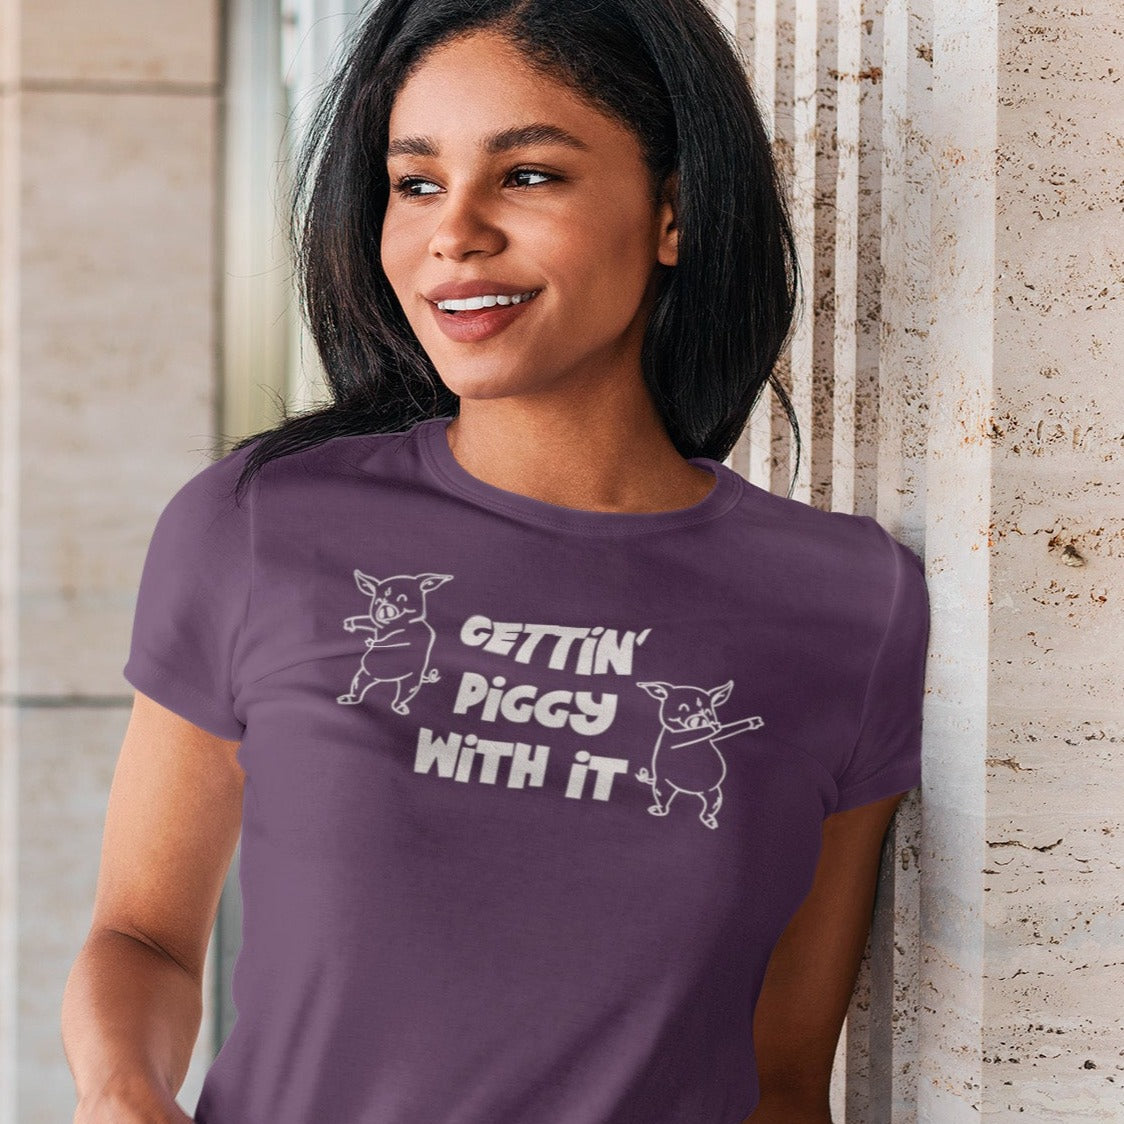 gettin-piggy-with-it-team-purple-t-shirt-funny-dancing-pigs-mockup-of-a-woman-wearing-a-t-shirt-and-leaning-against-a-granite-wall